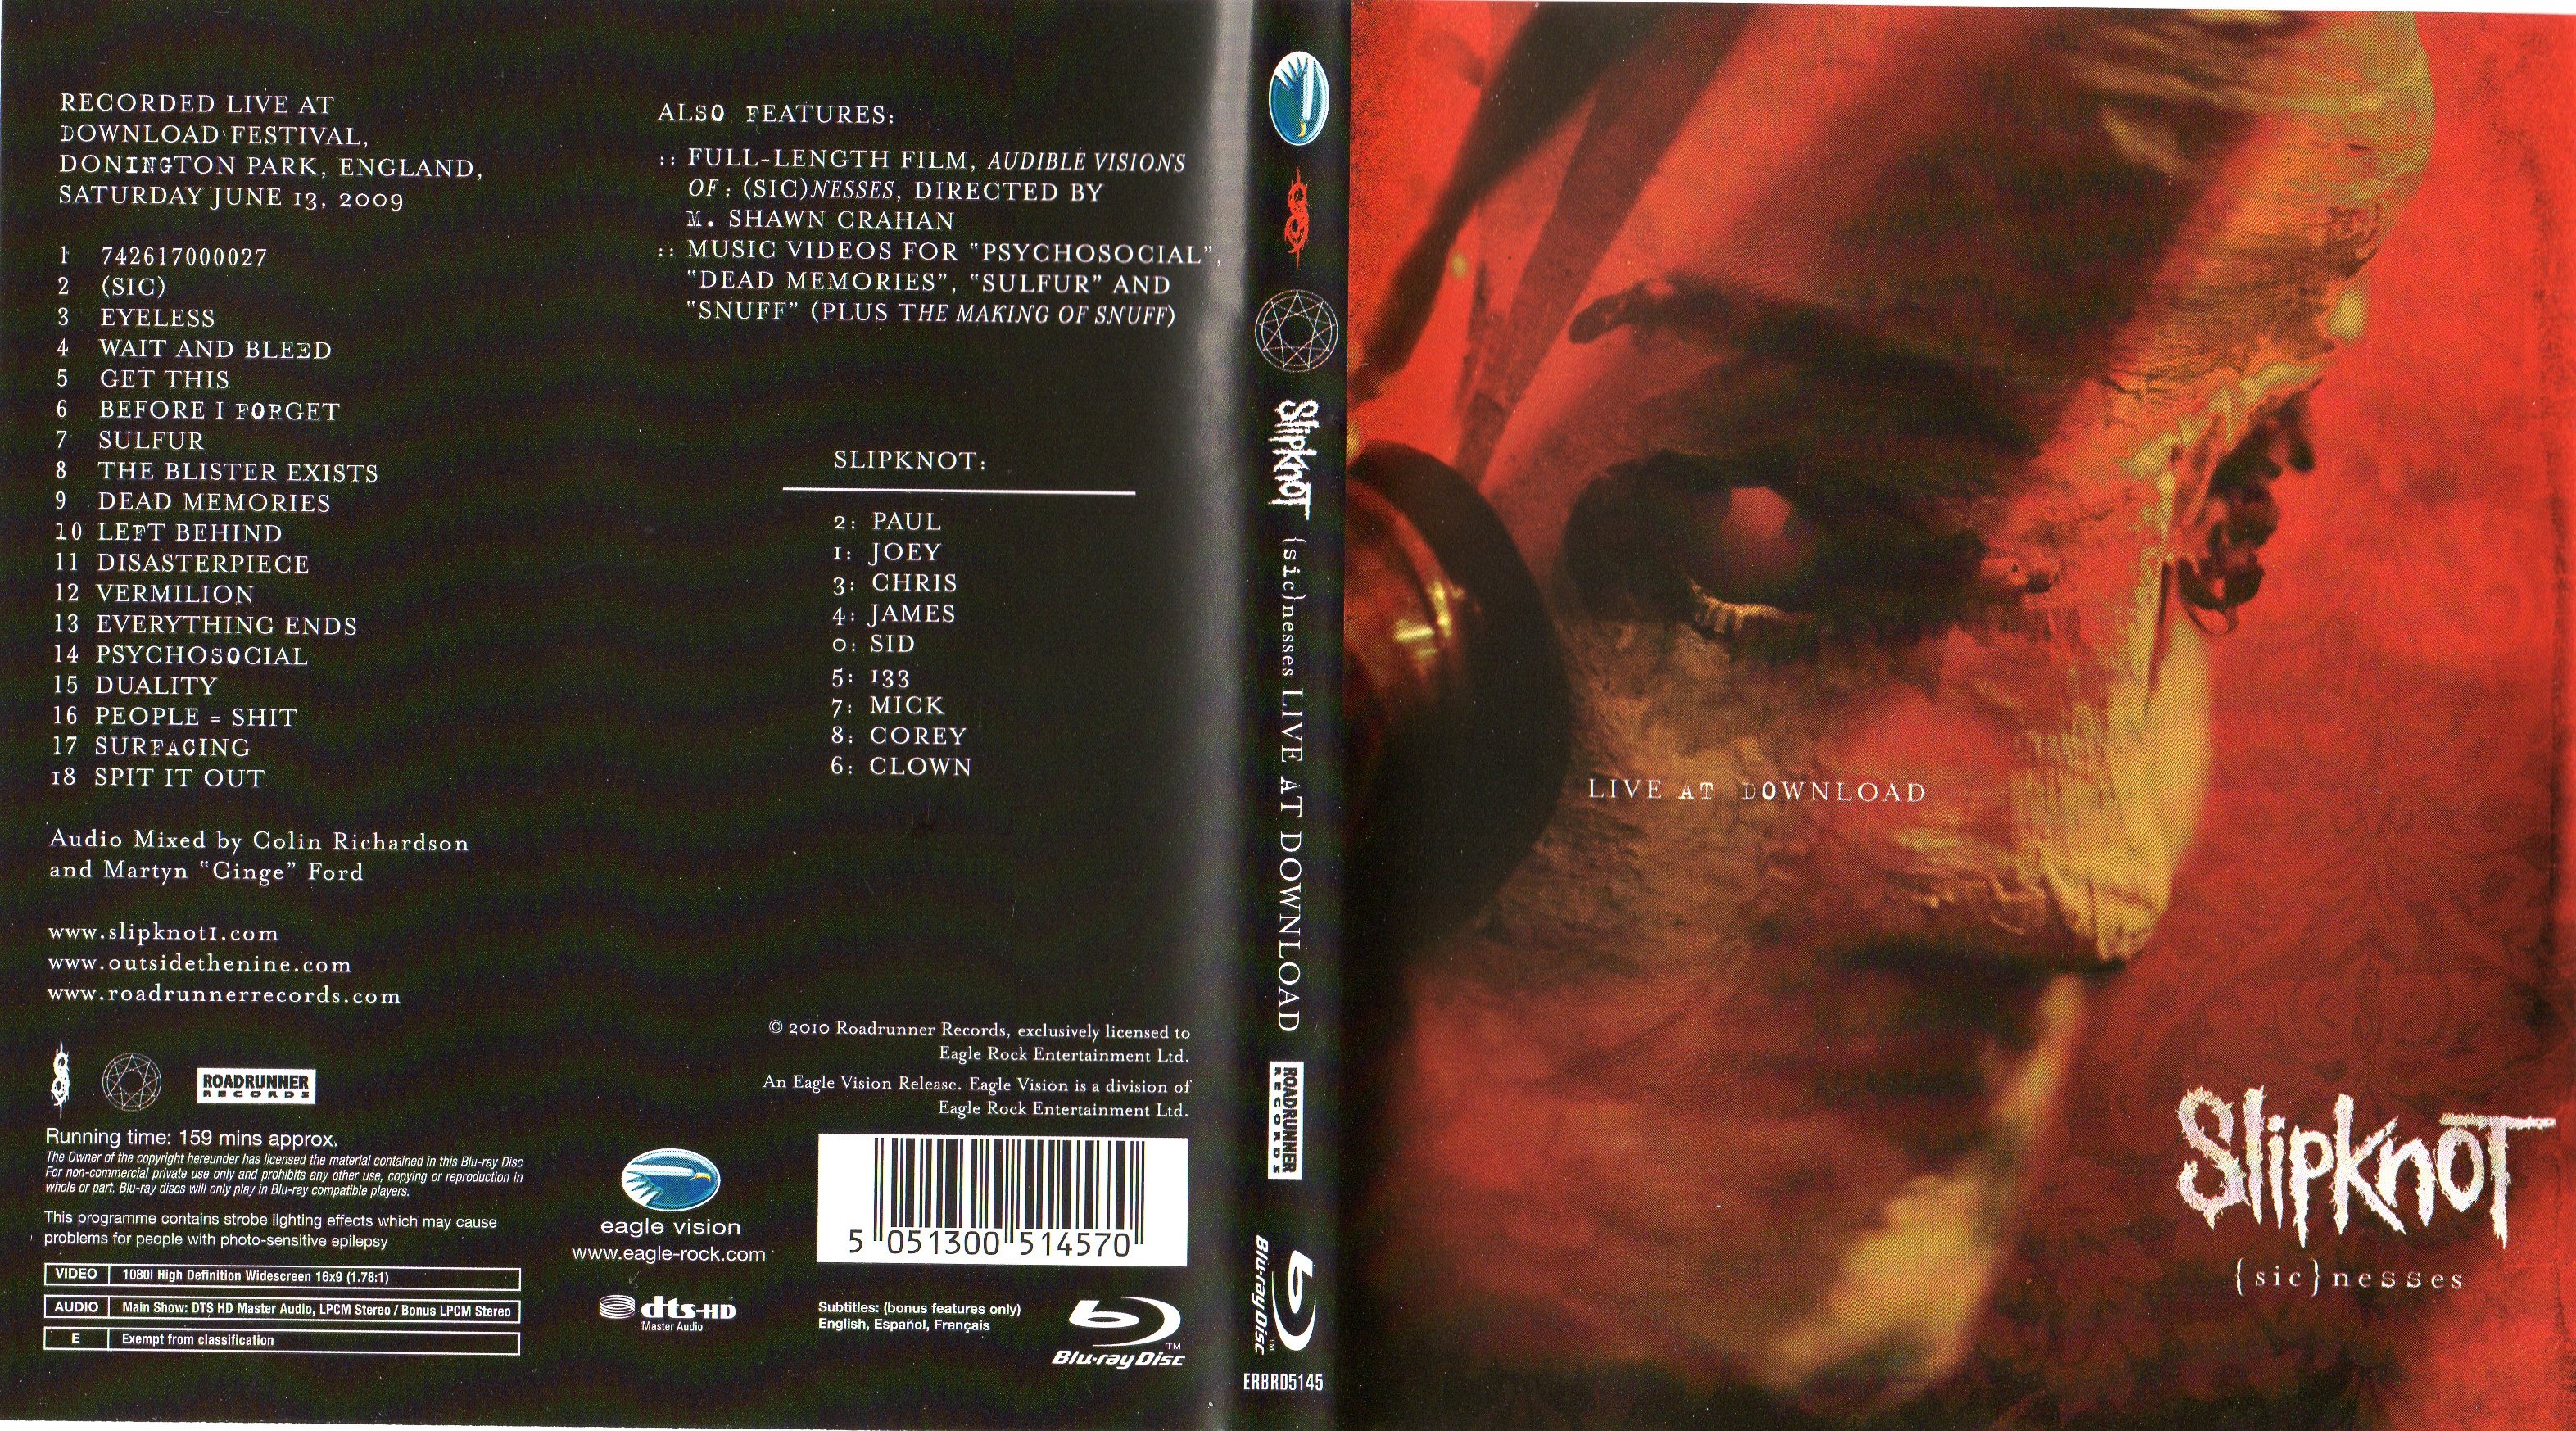 Jaquette DVD Slipknot - {sic}ness Live at download (BLU-RAY)